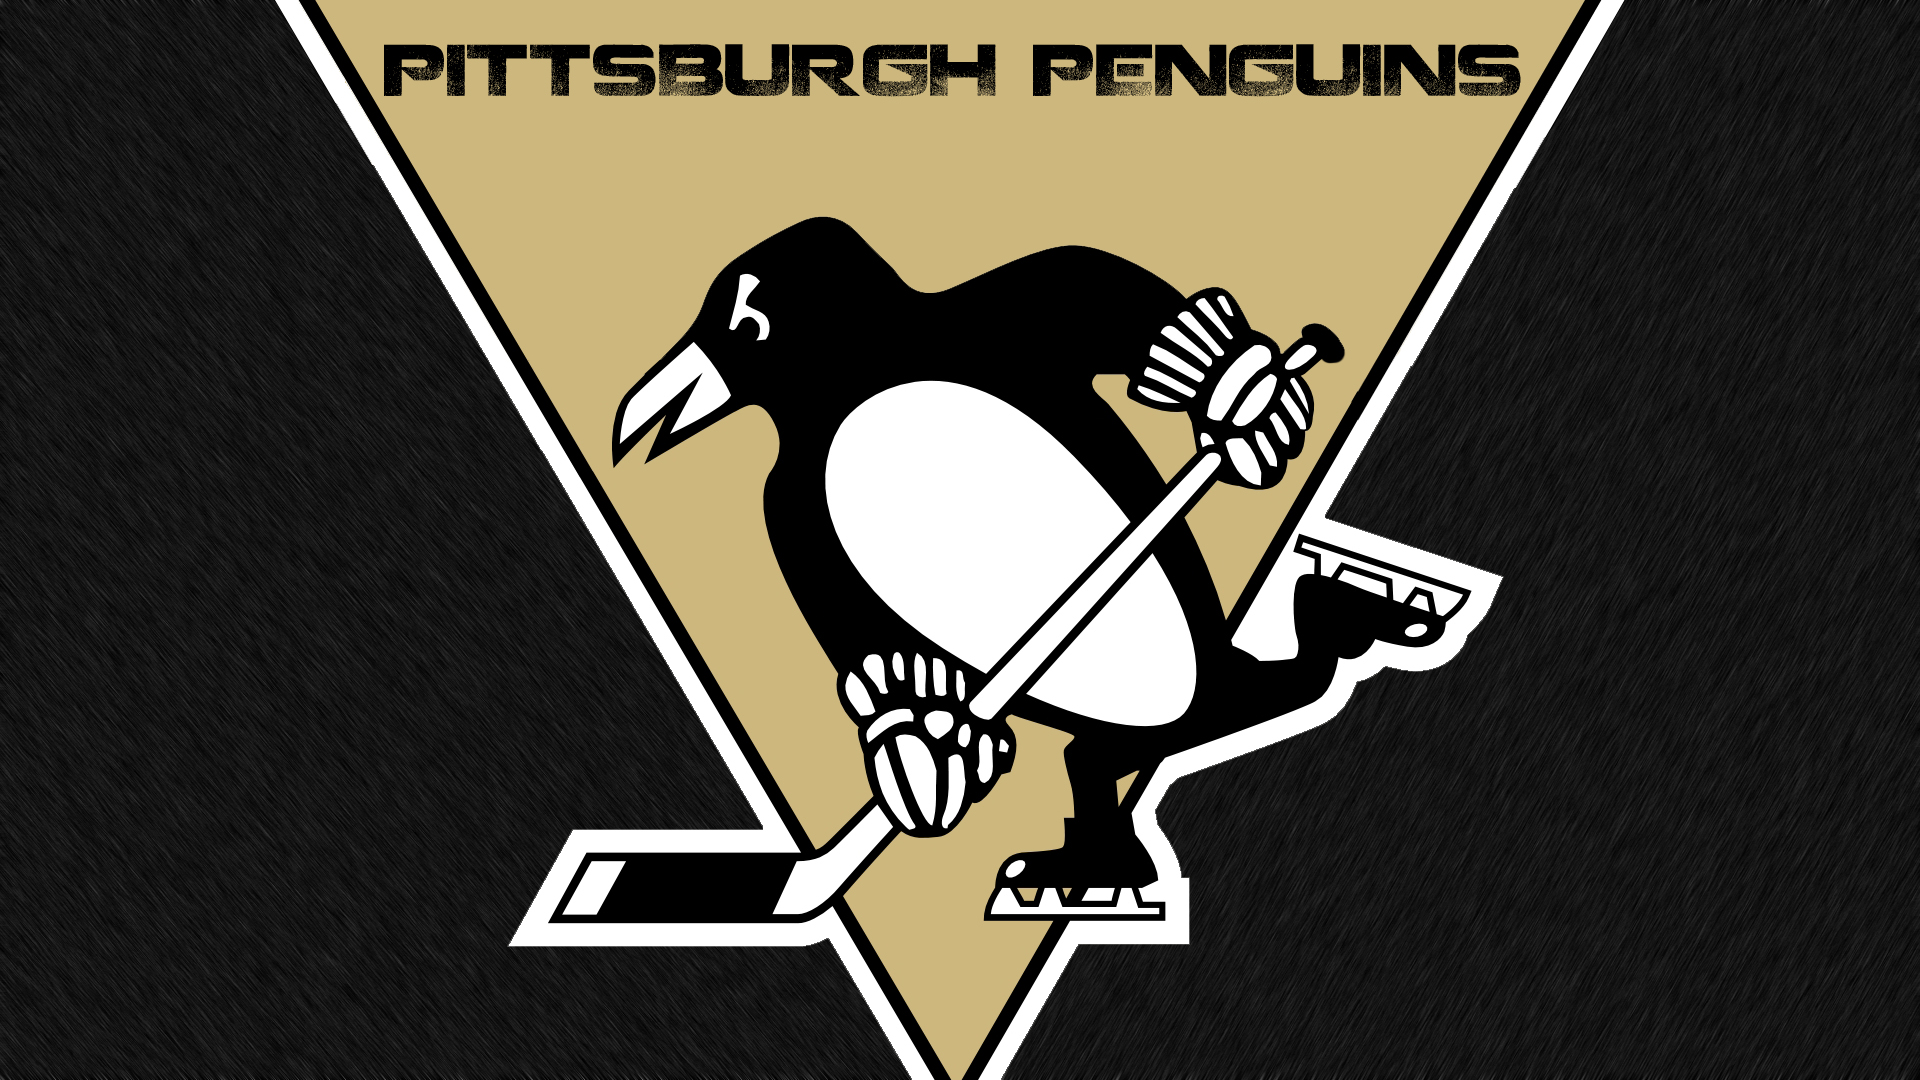 Pictures-Pittsburgh-Penguins-Logo-Wallpapers.jpg